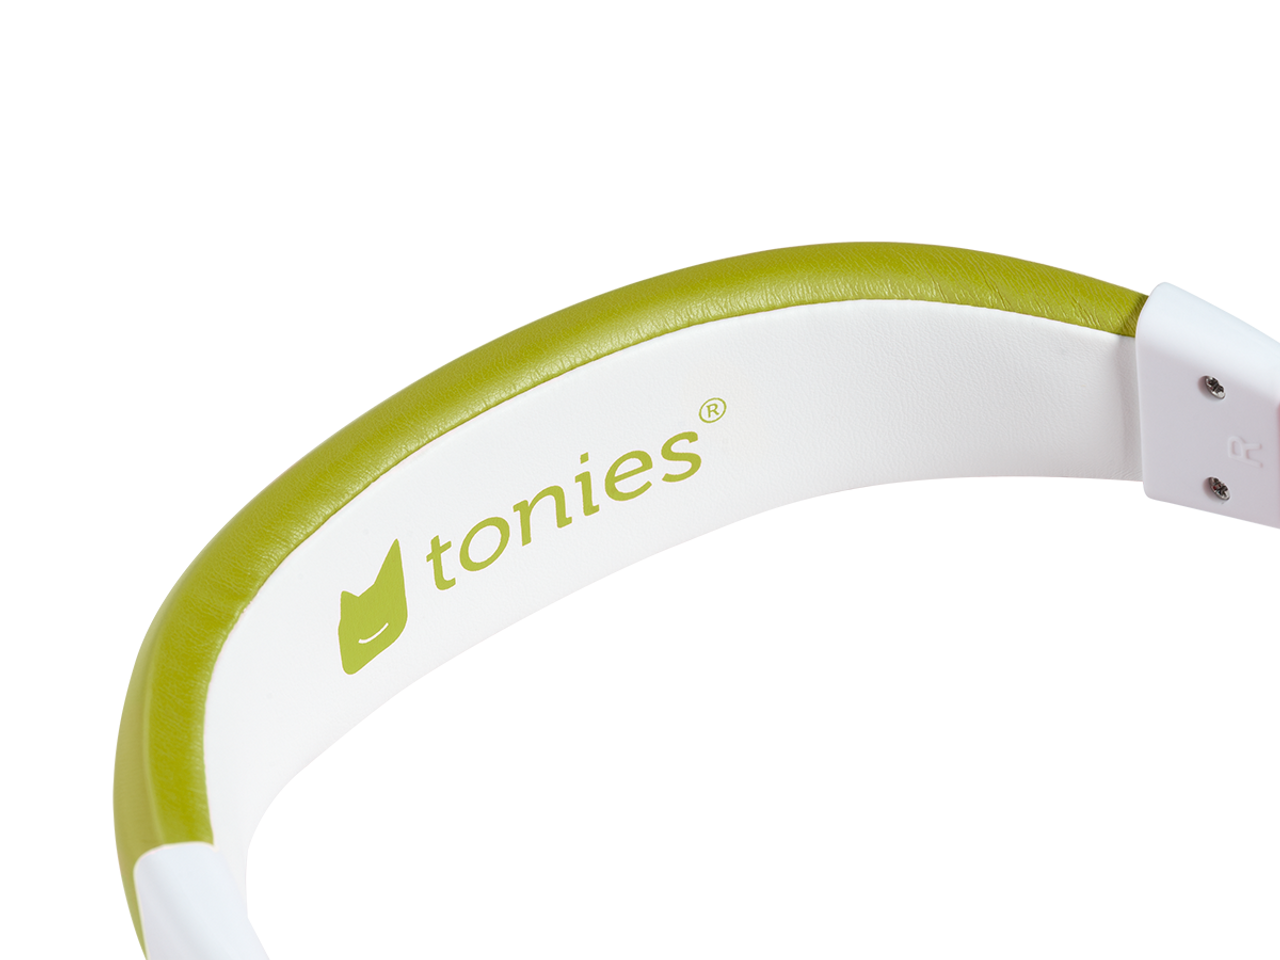 Tonies Kids Headphones For The Toniebox Green White Safe Volume Limit